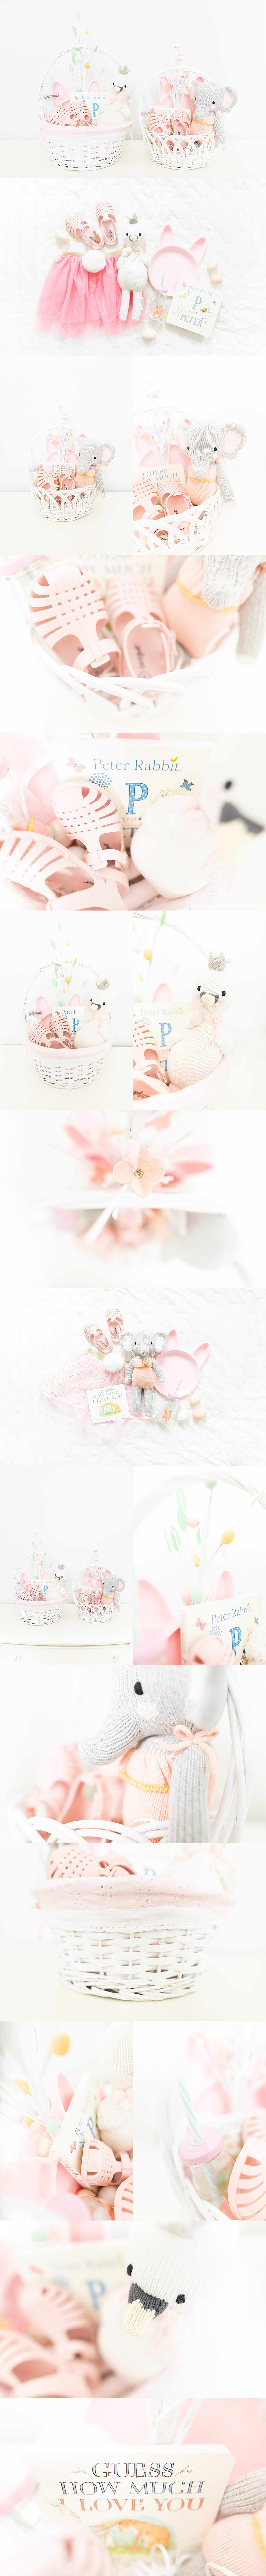 Toddler Girl Easter Baskets: Classic Ideas To Fill Your Baskets With | Bethadilly Photography | www.bethadilly.com